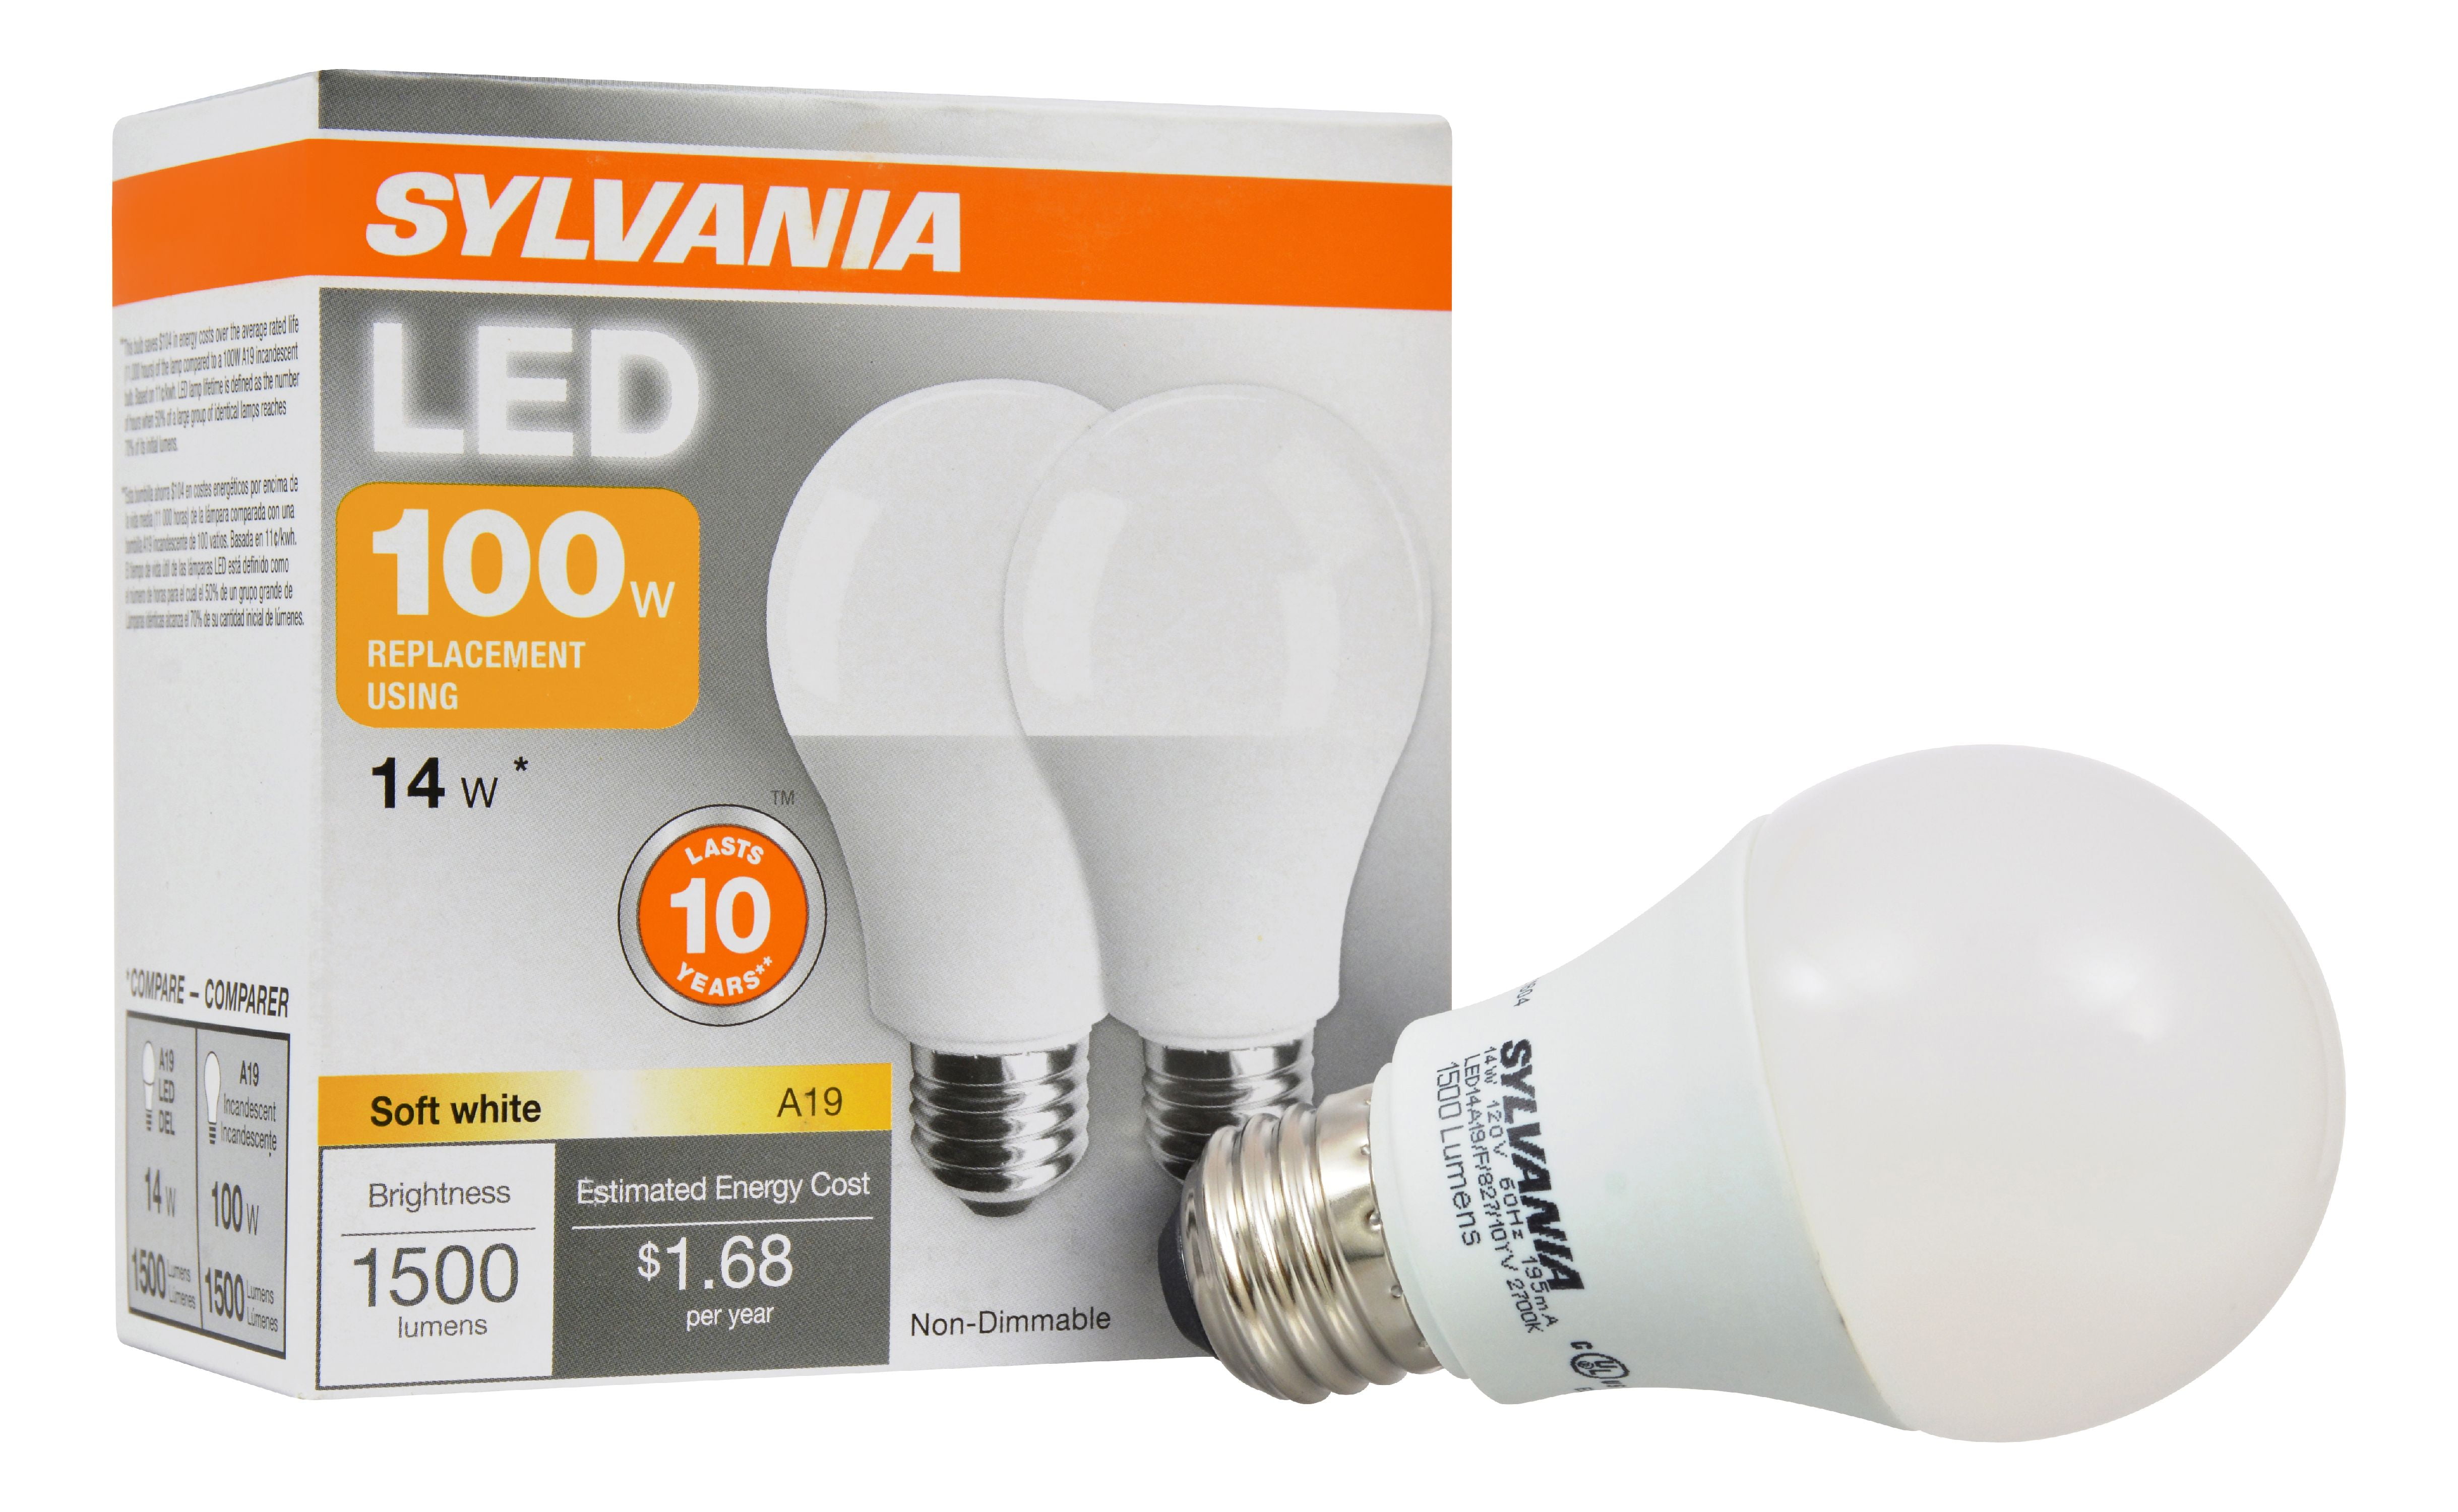 SYLVANIA 40739 LED A19 Light Bulb 100W Equivalent Efficient 16W 4 Pack Dimmable Frosted 5000K Daylight Medium Base 